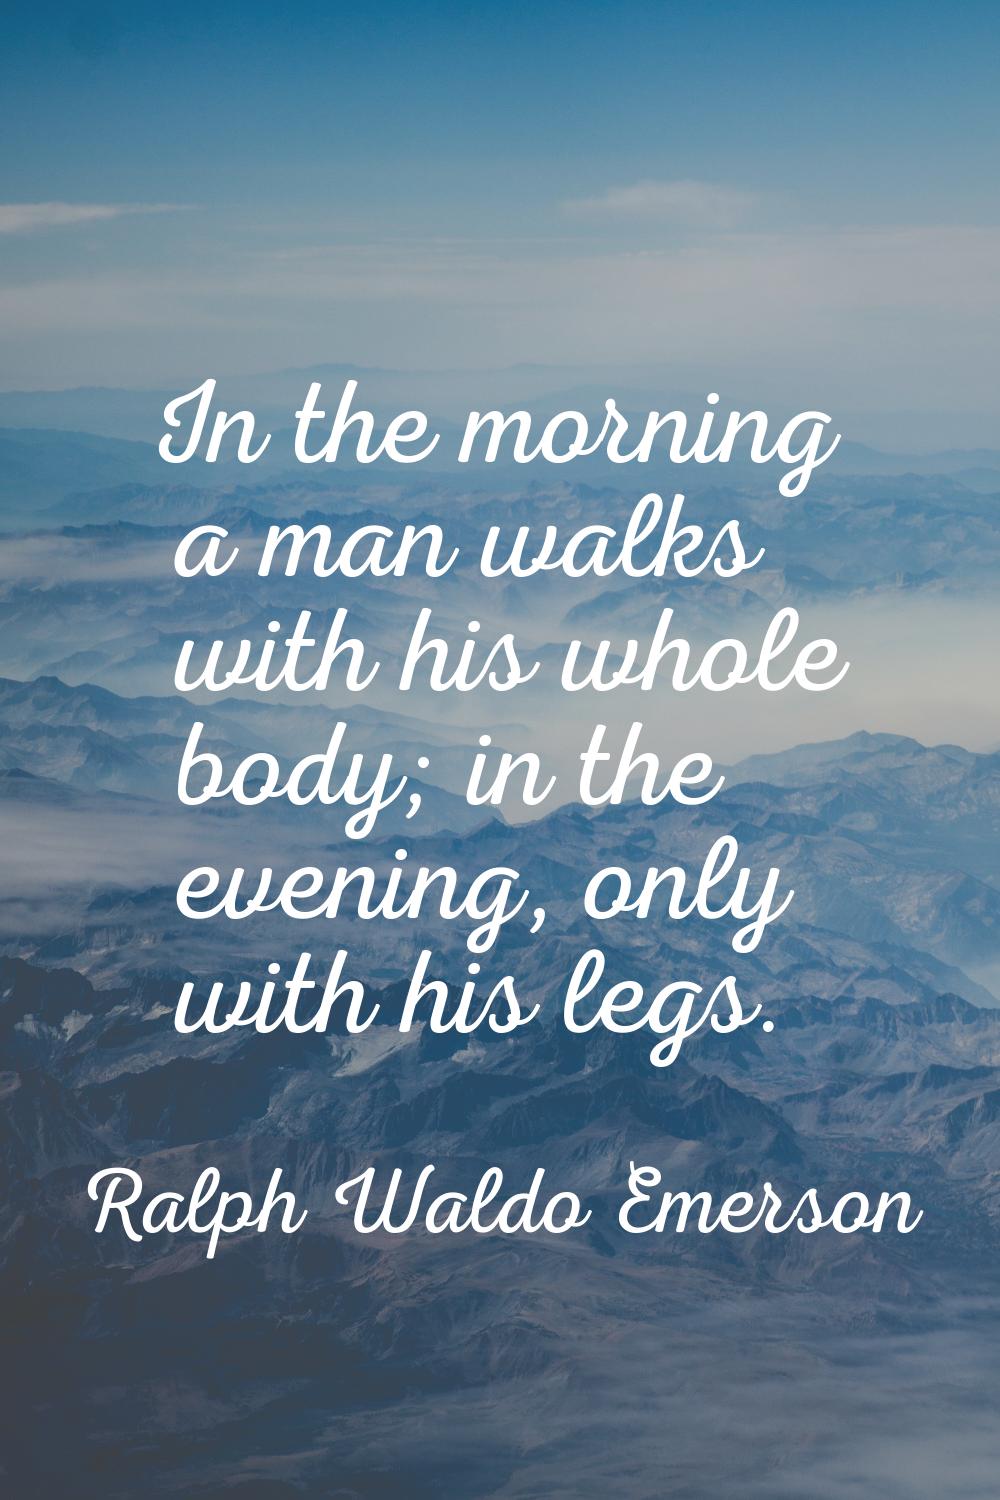 In the morning a man walks with his whole body; in the evening, only with his legs.